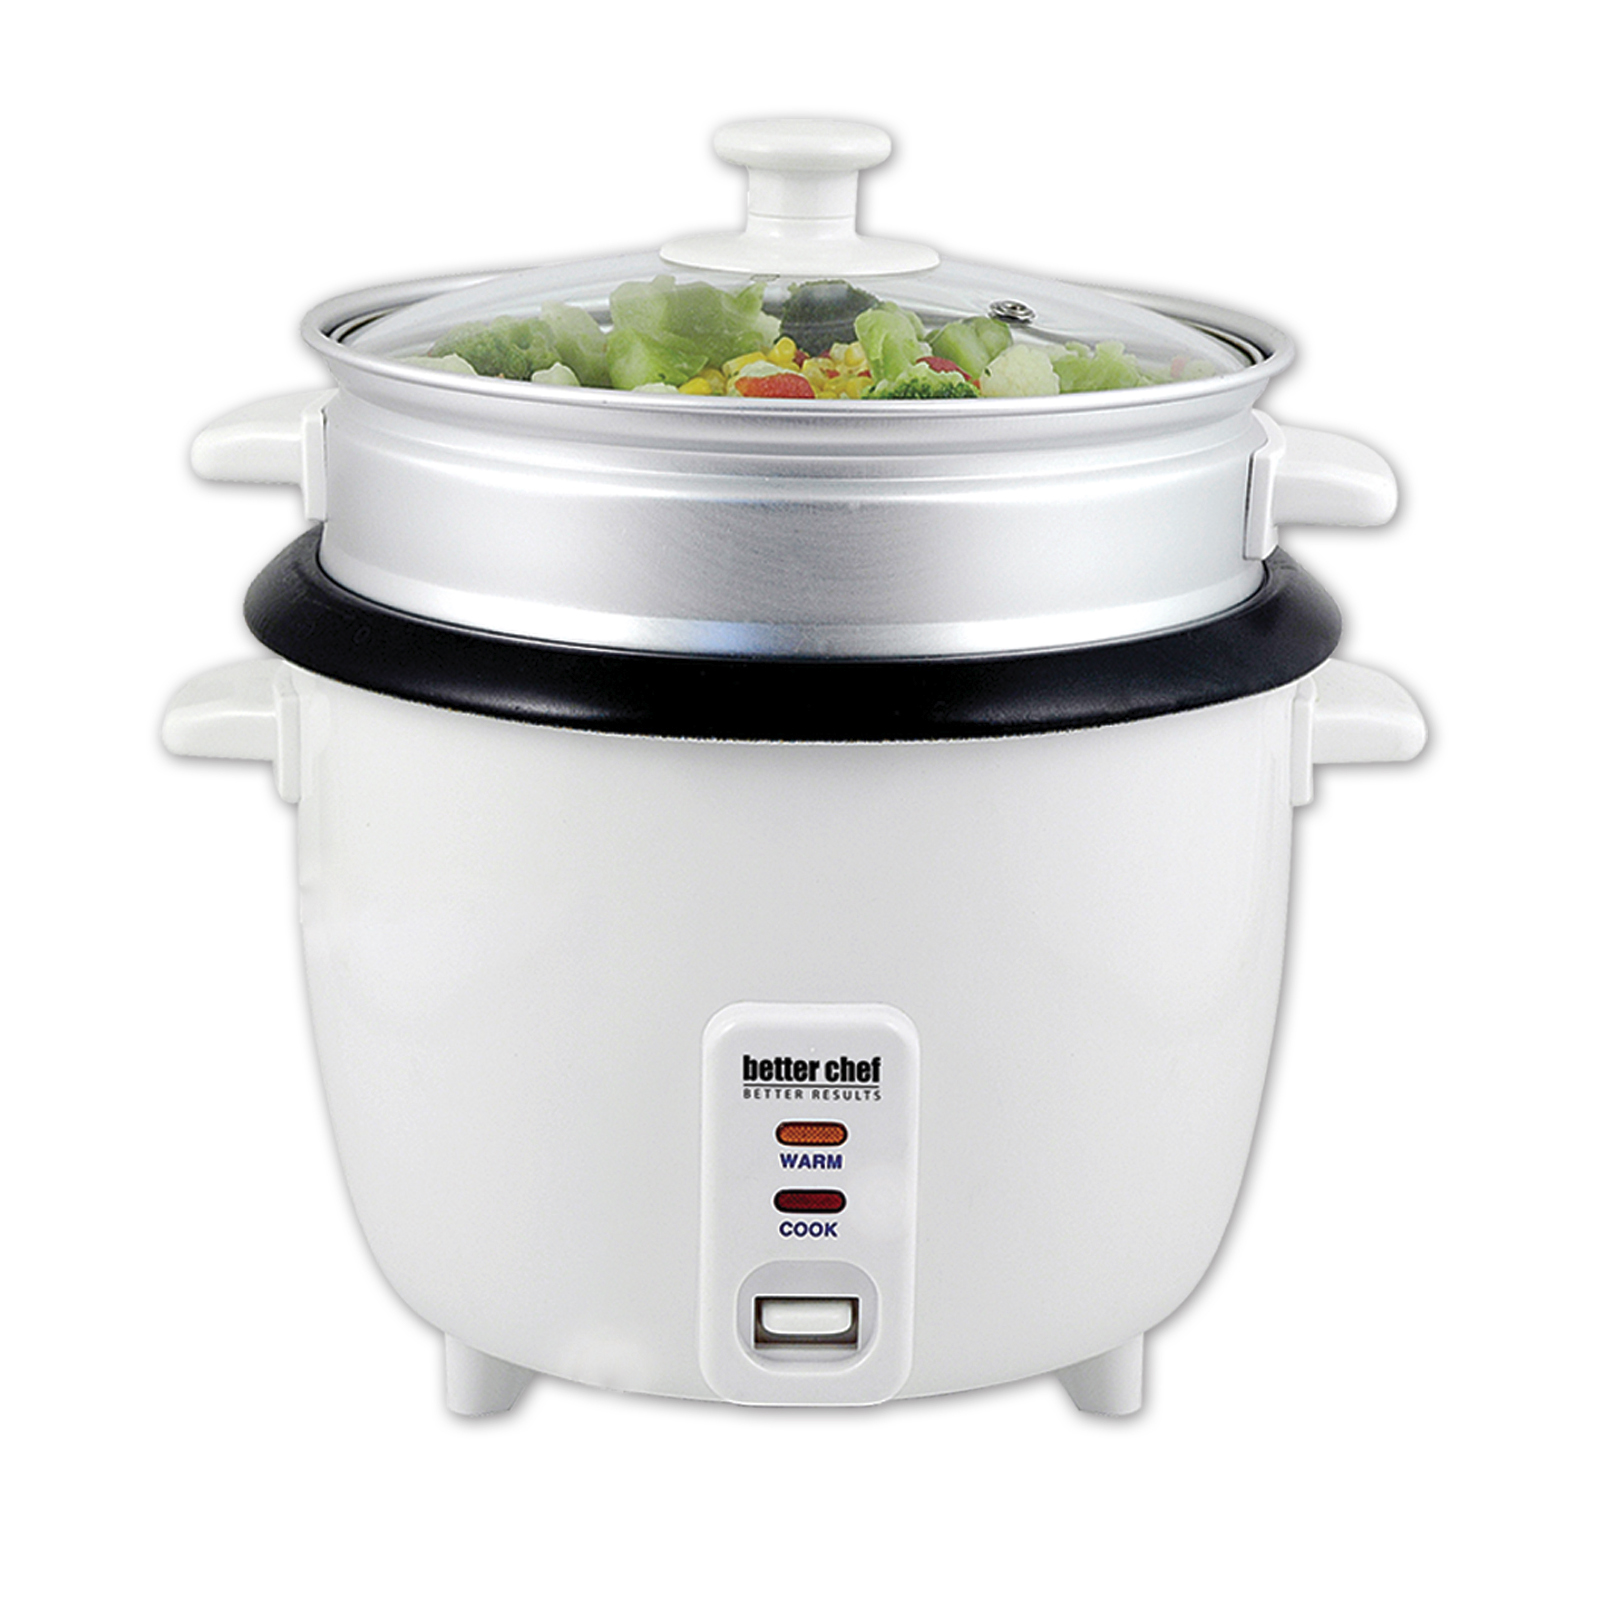 Better Chef IM-405SB 5-Cup Rice Cooker with Food Steamer